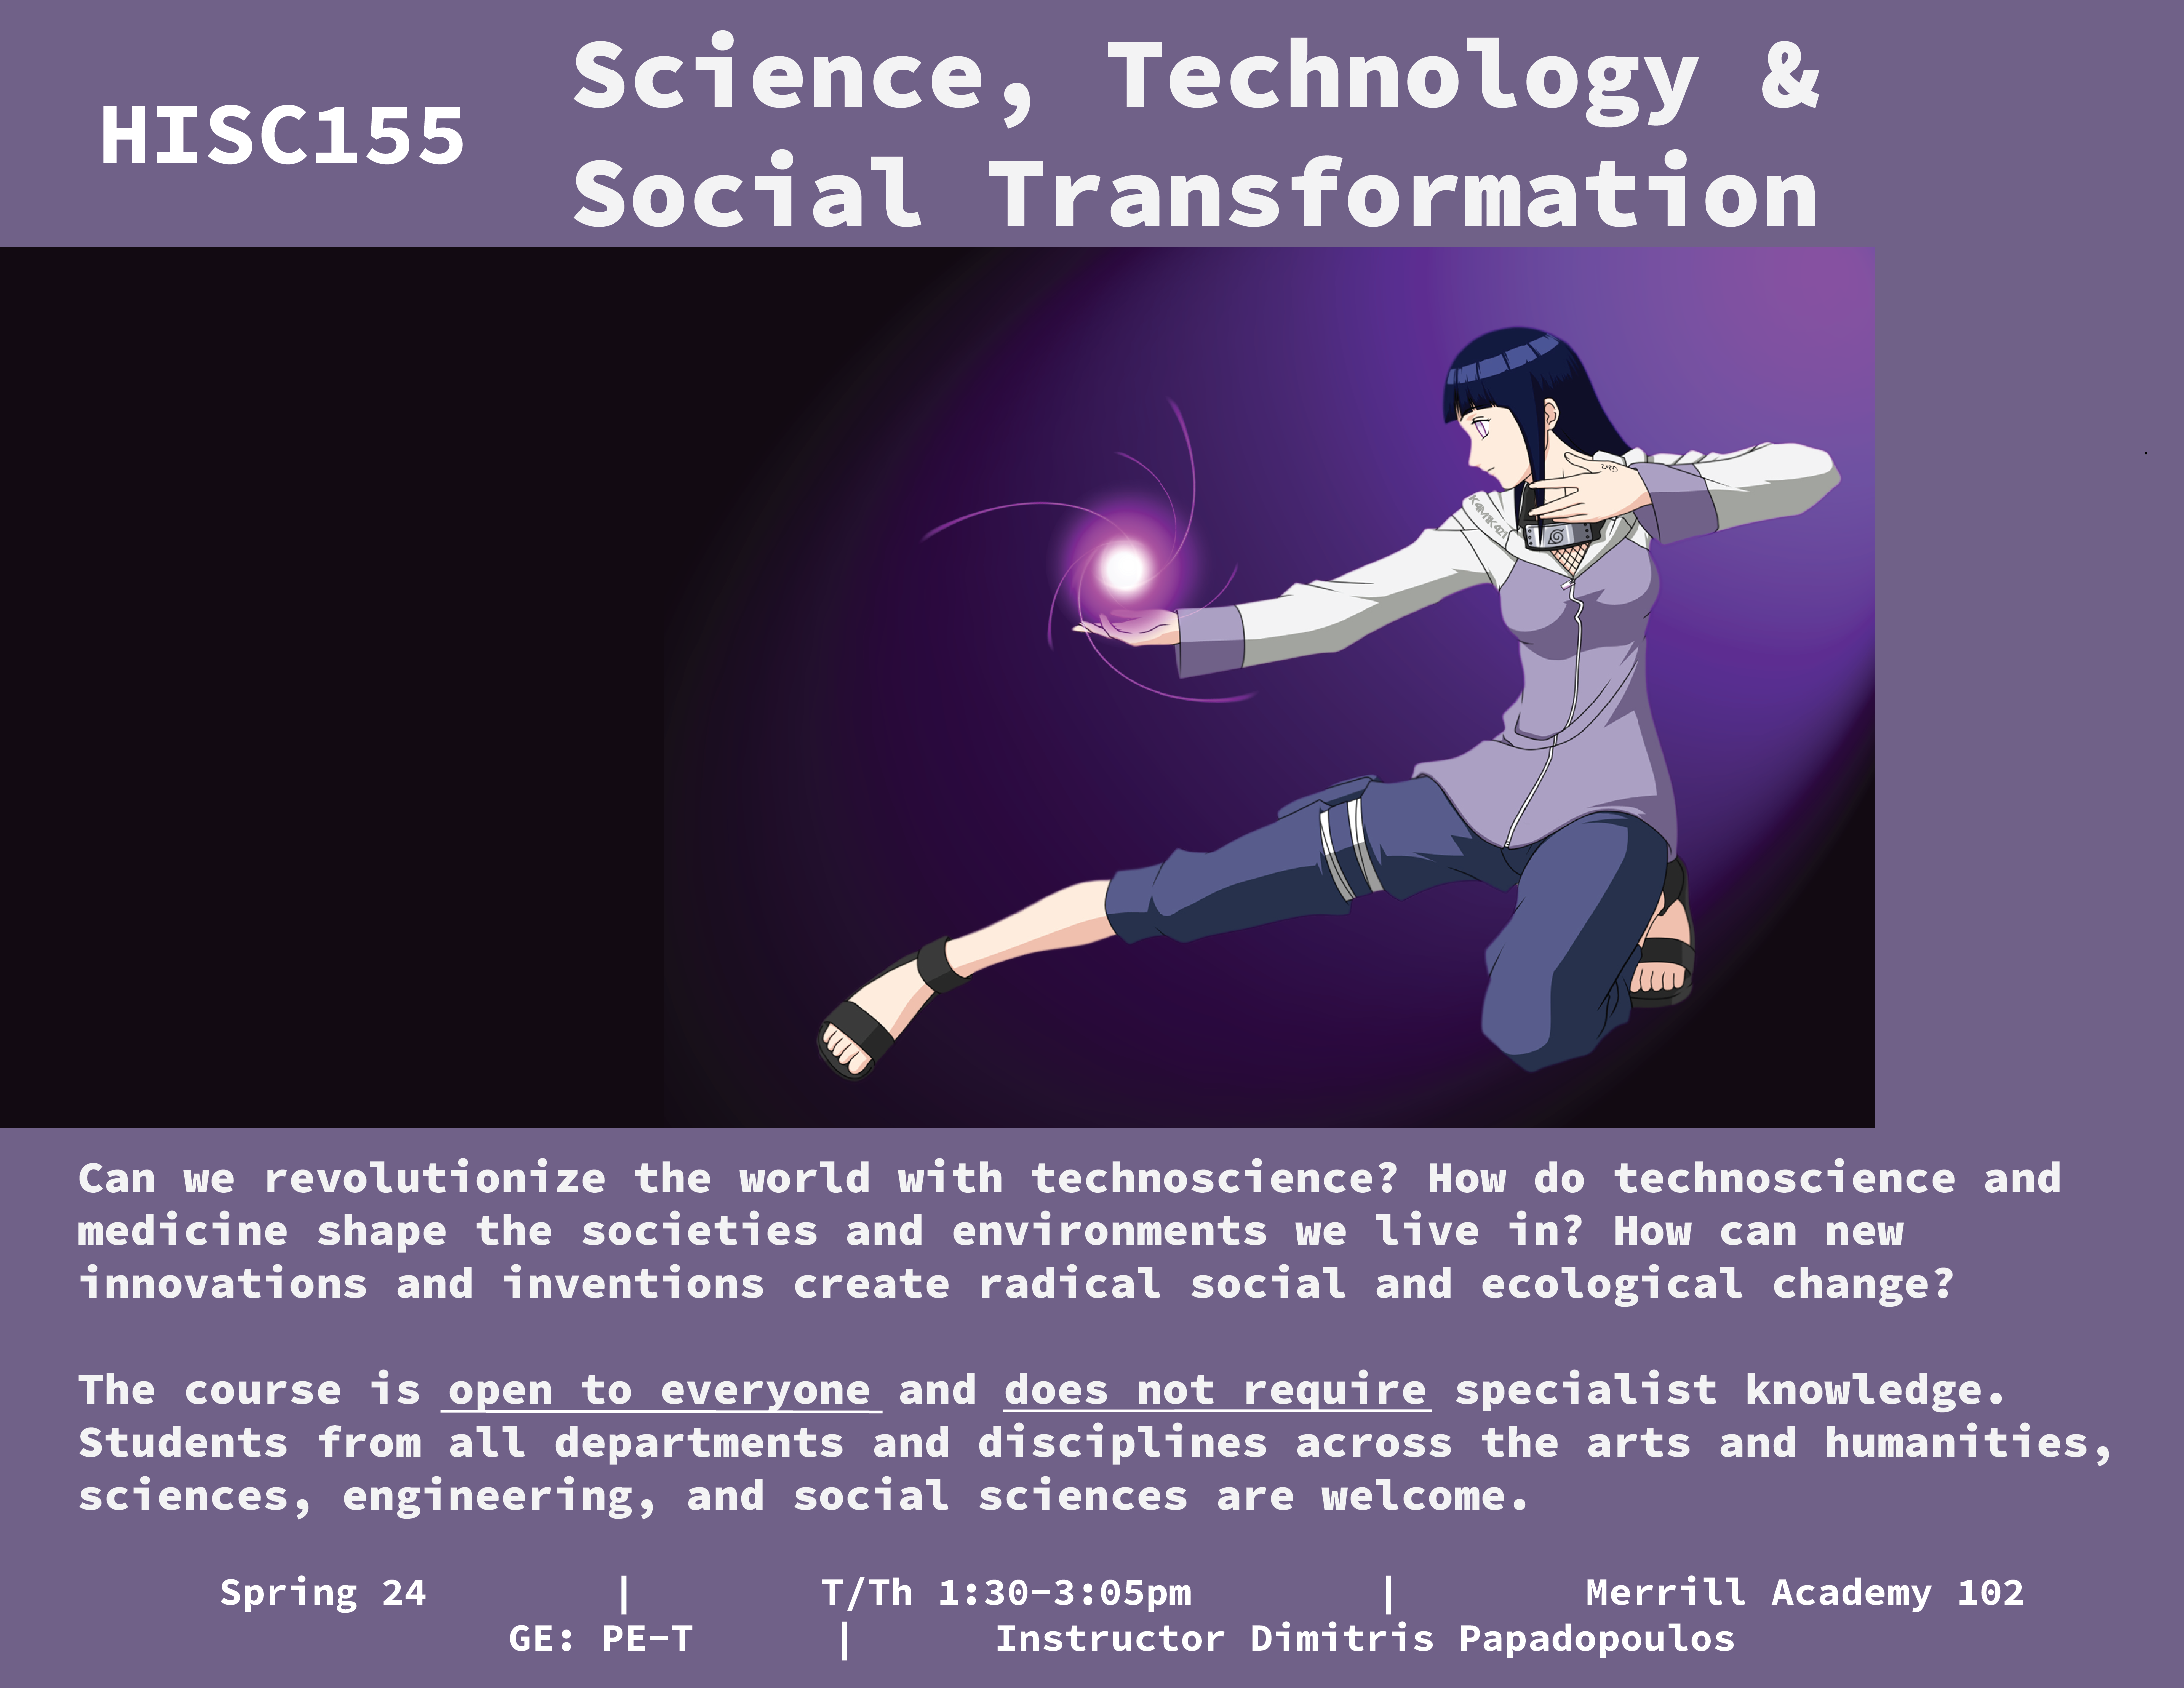 HISC 155: Science, Technology, & Social Transformation